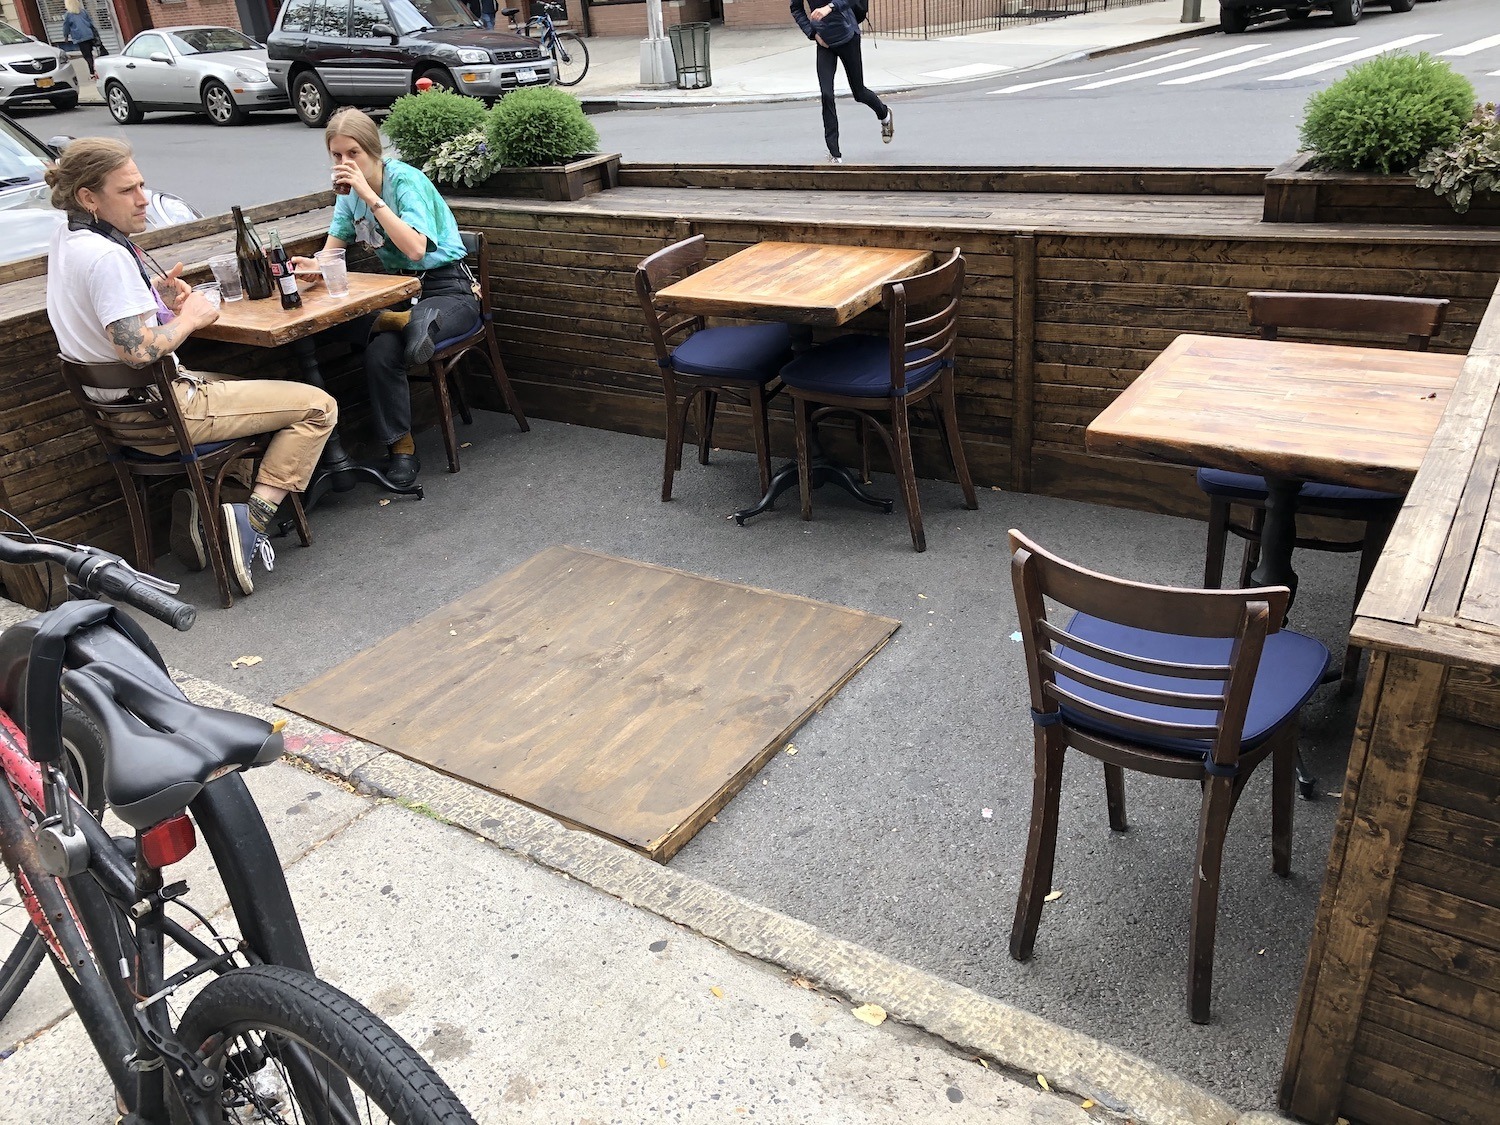 Outdoor seating with an ADA ramp. October 2020